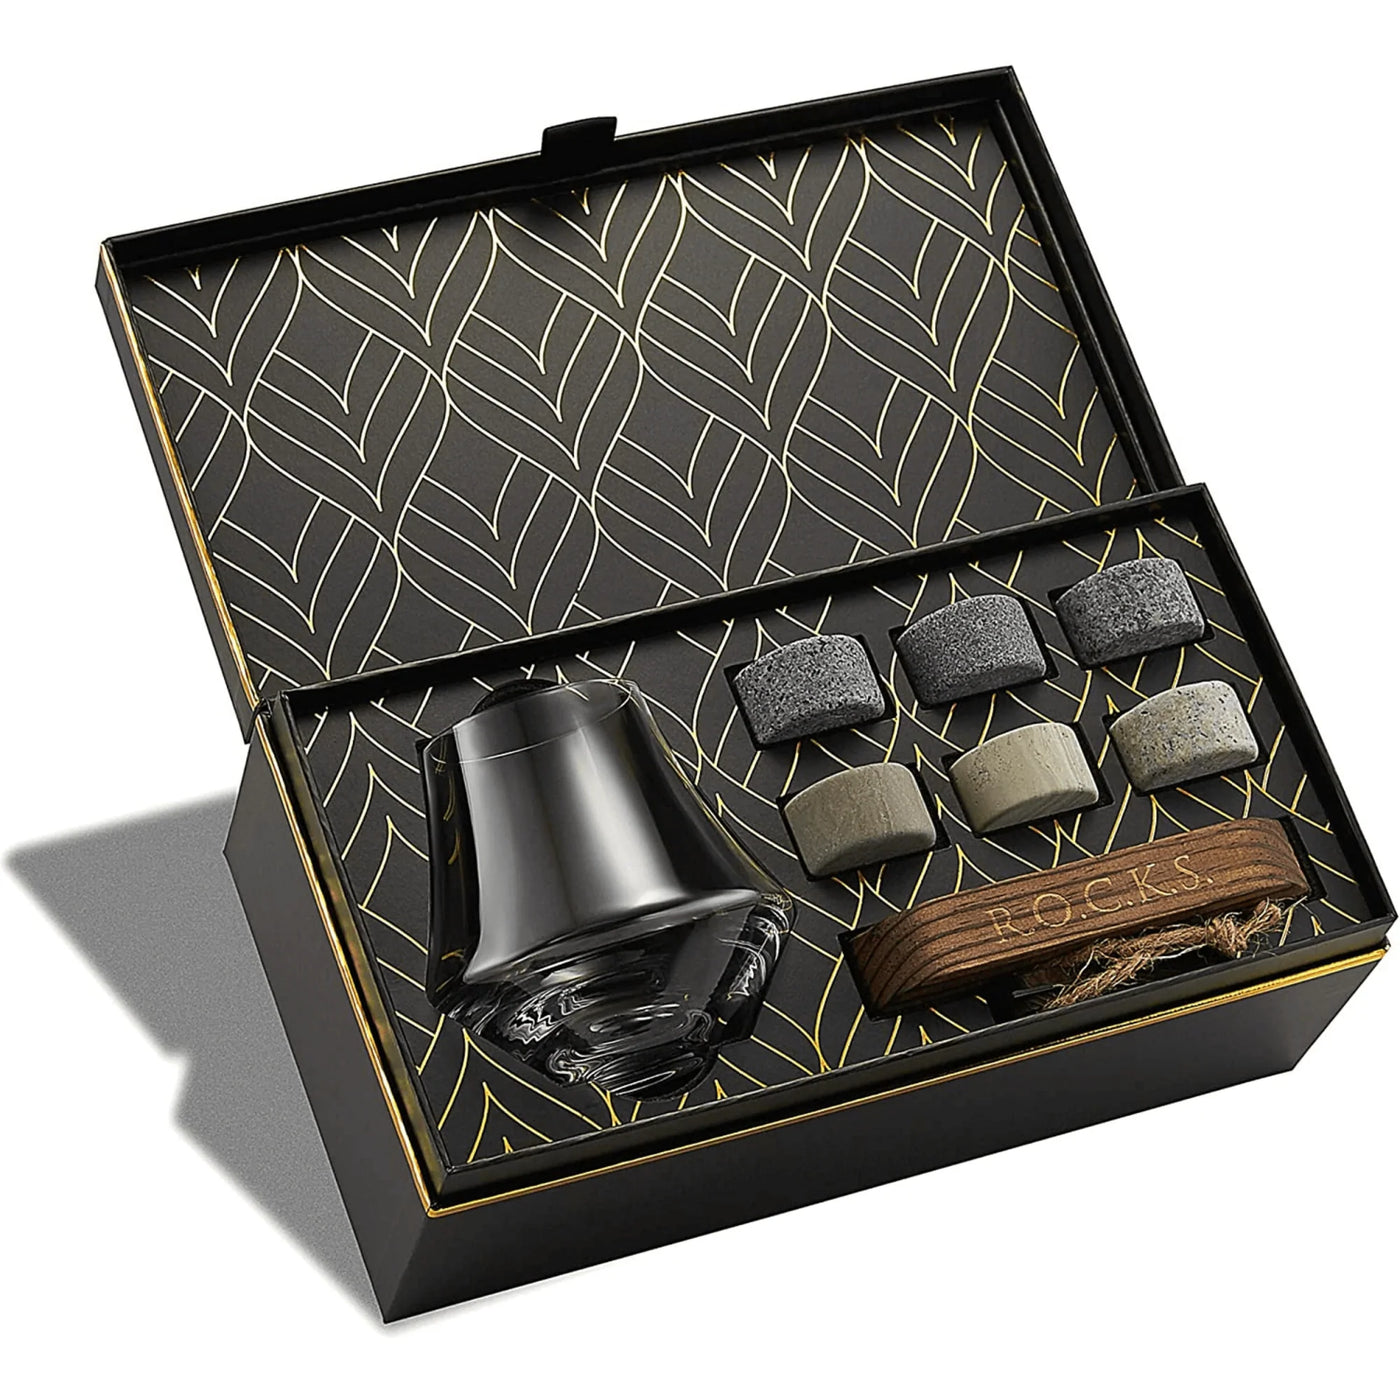 The Connoisseur's Set - Nosing Glass Edition - TwoBeeps.co.uk